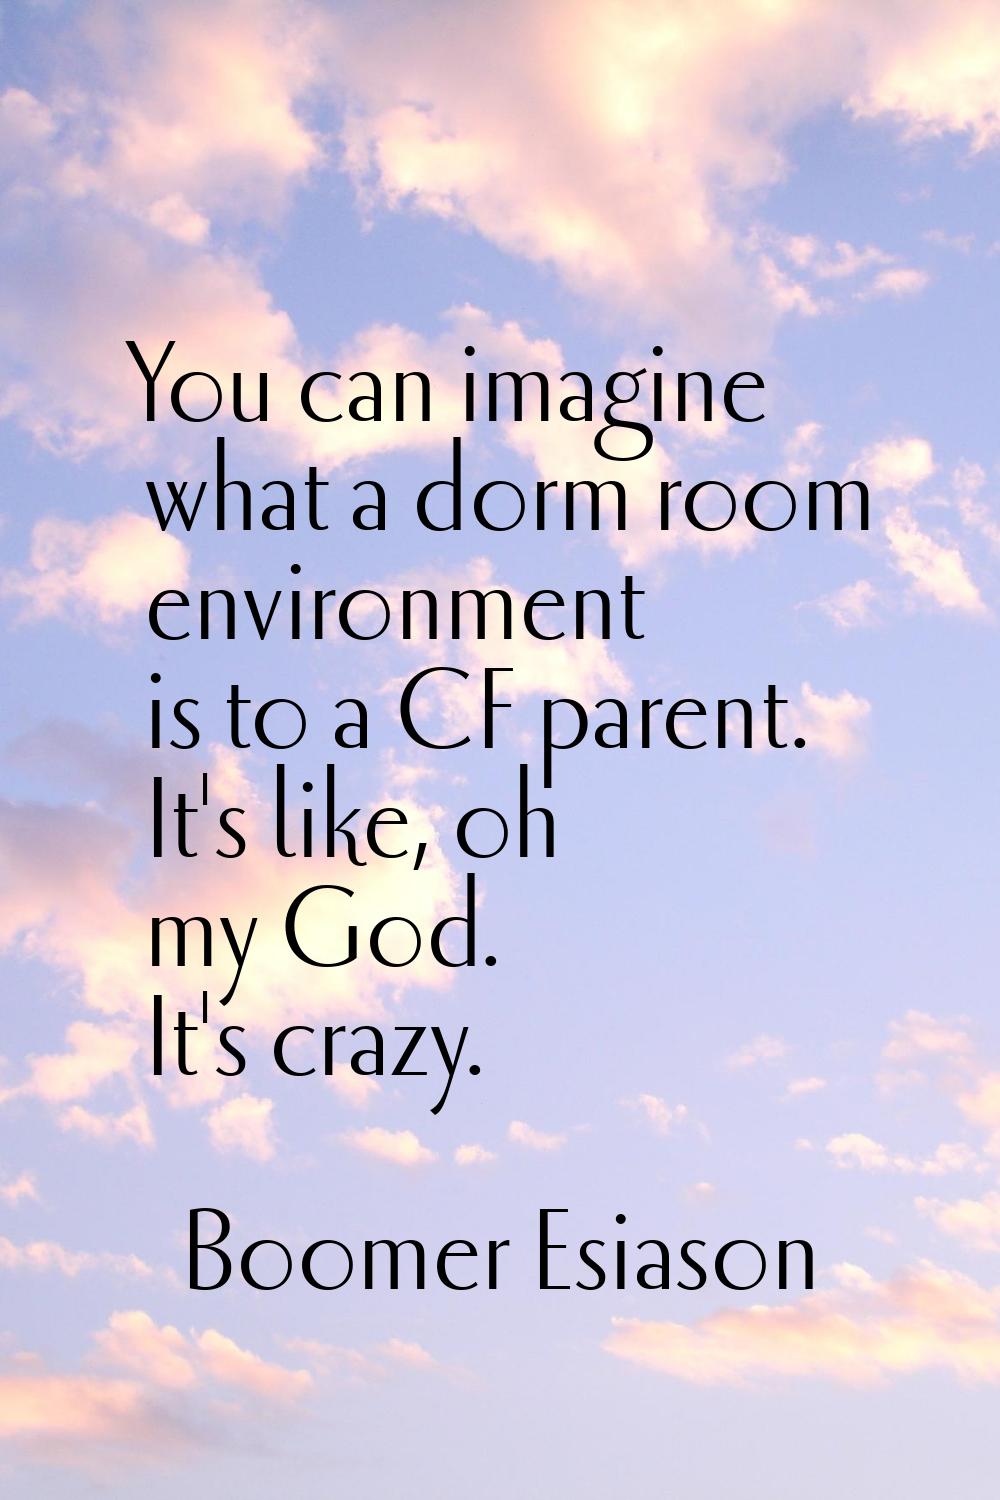 You can imagine what a dorm room environment is to a CF parent. It's like, oh my God. It's crazy.